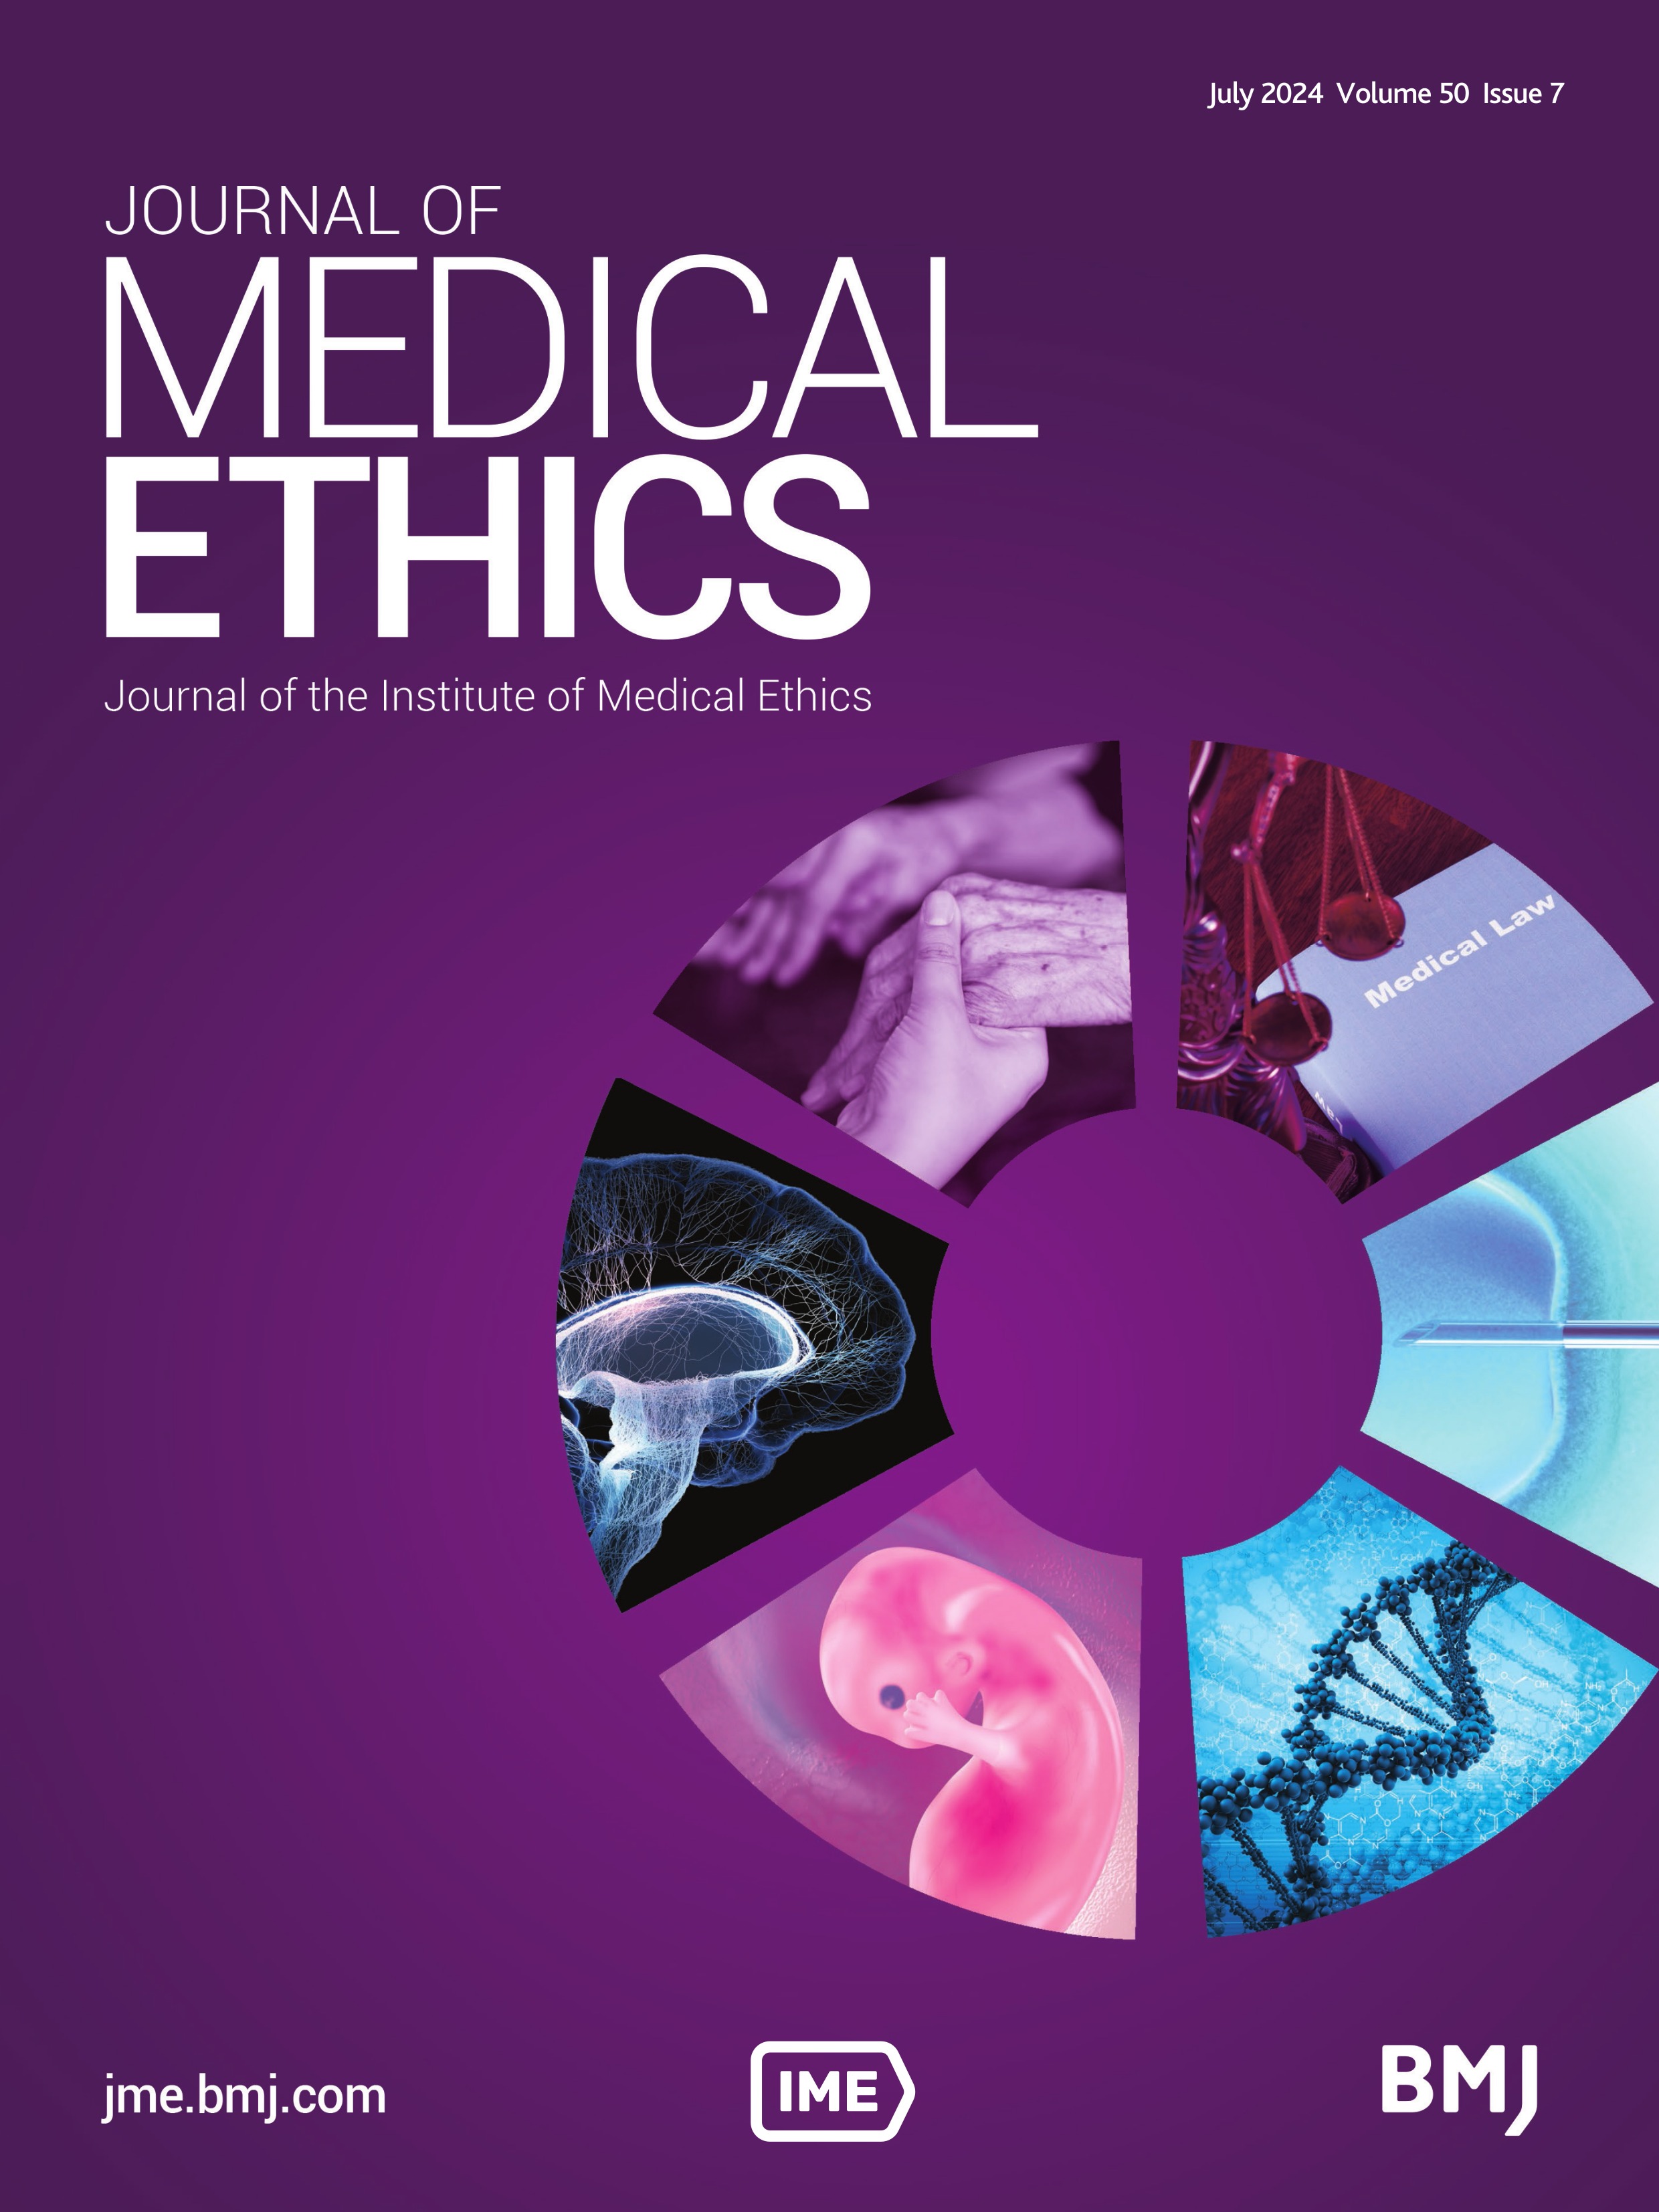 Ethical implications of disparities in translation genomic medicine: from research to practice